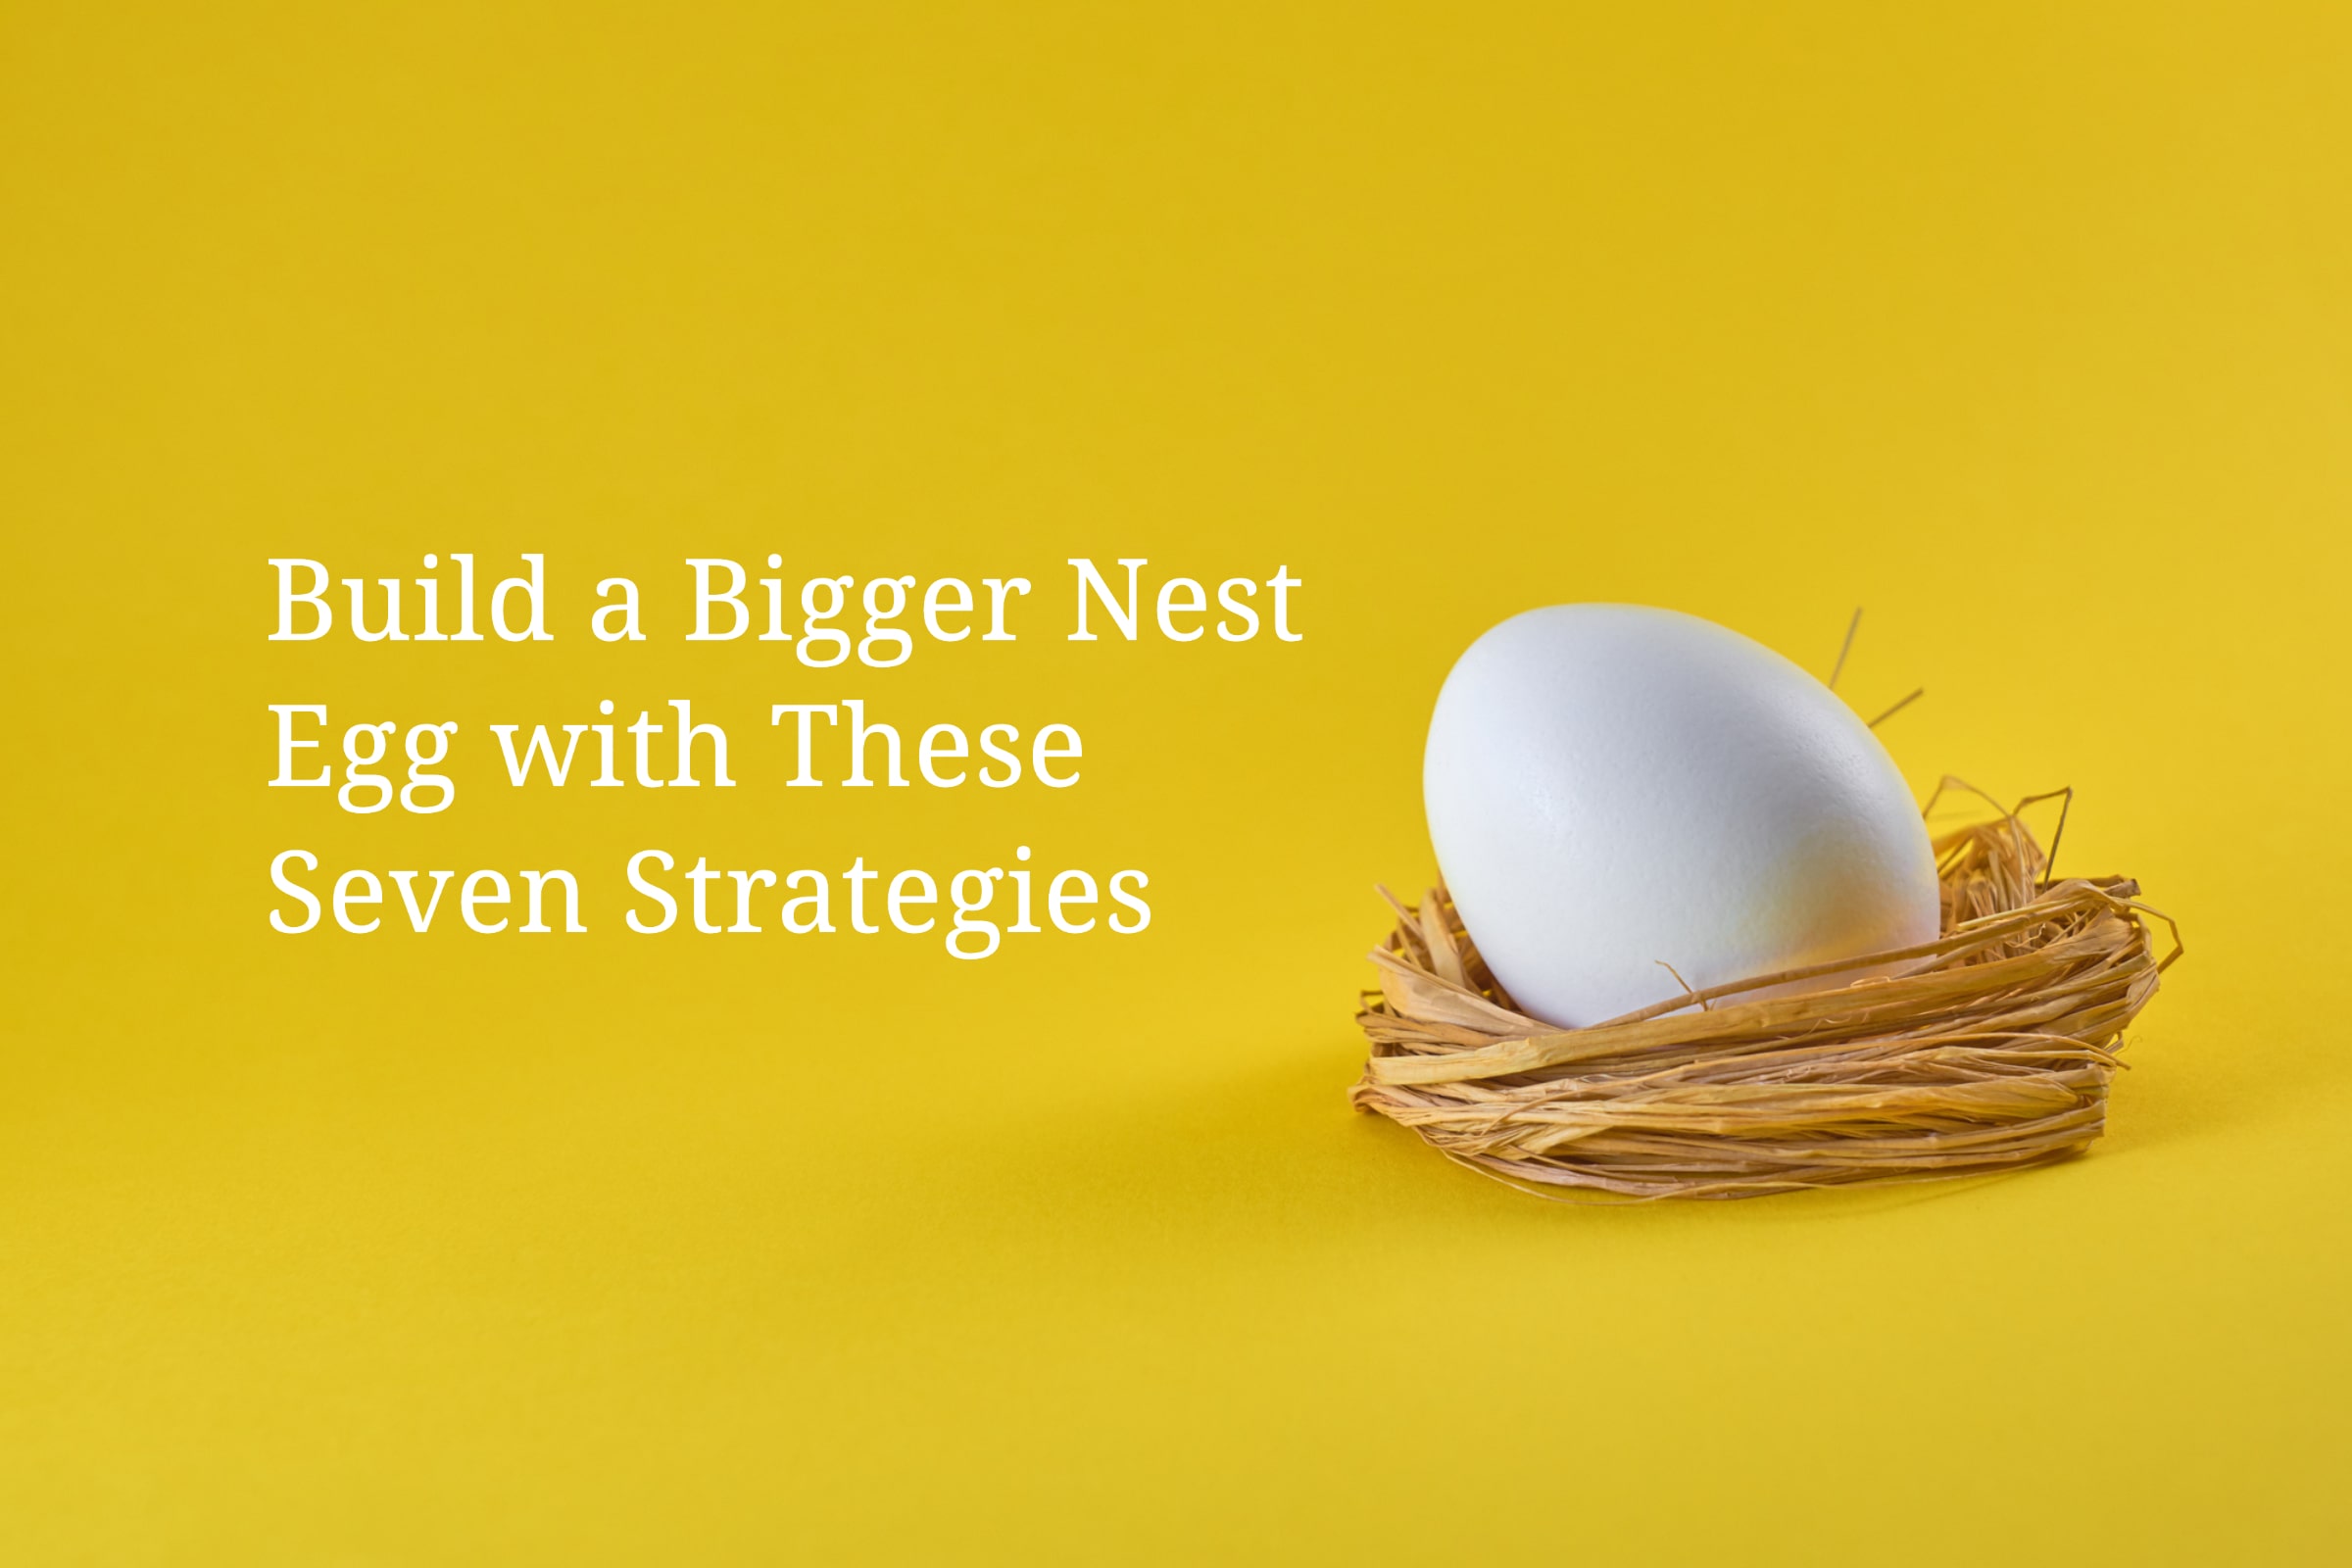 06-2023-EG-A2-FI03-Build-a-Bigger-Nest-Egg-with-These-7-Strategies-min